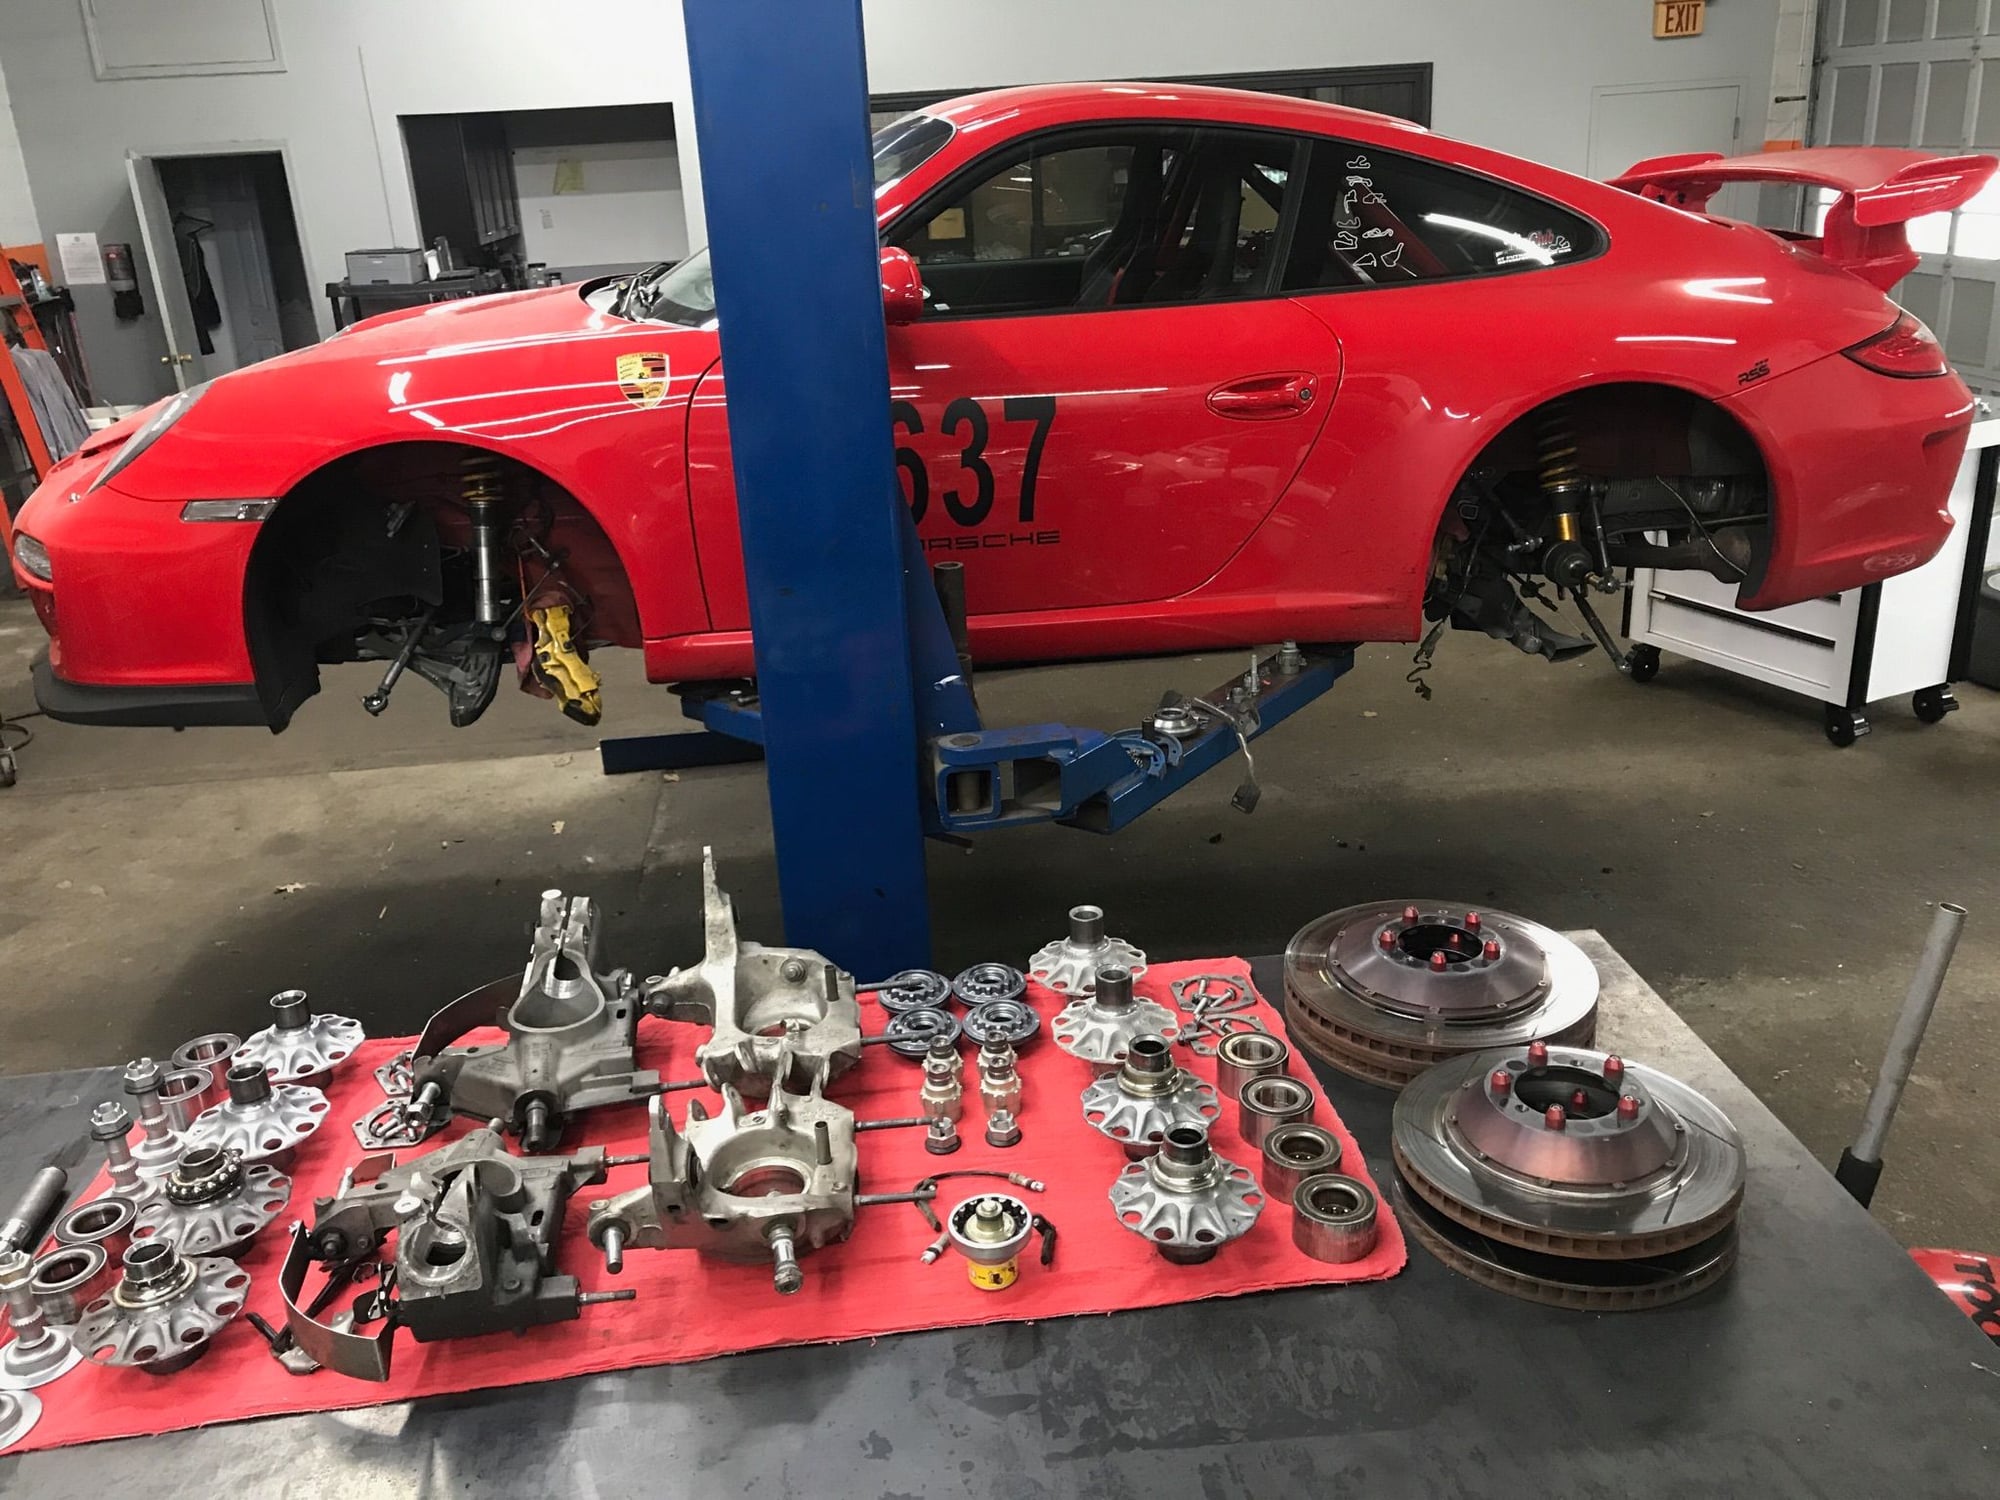 2010 Porsche GT3 - 2010 911 GT3 Ready for track  Original Owner Many upgrades  Well-sorted car - Used - VIN WP0AC2A98AS783370 - 22 Miles - 6 cyl - 2WD - Manual - Coupe - Red - Louisville, KY 40205, United States